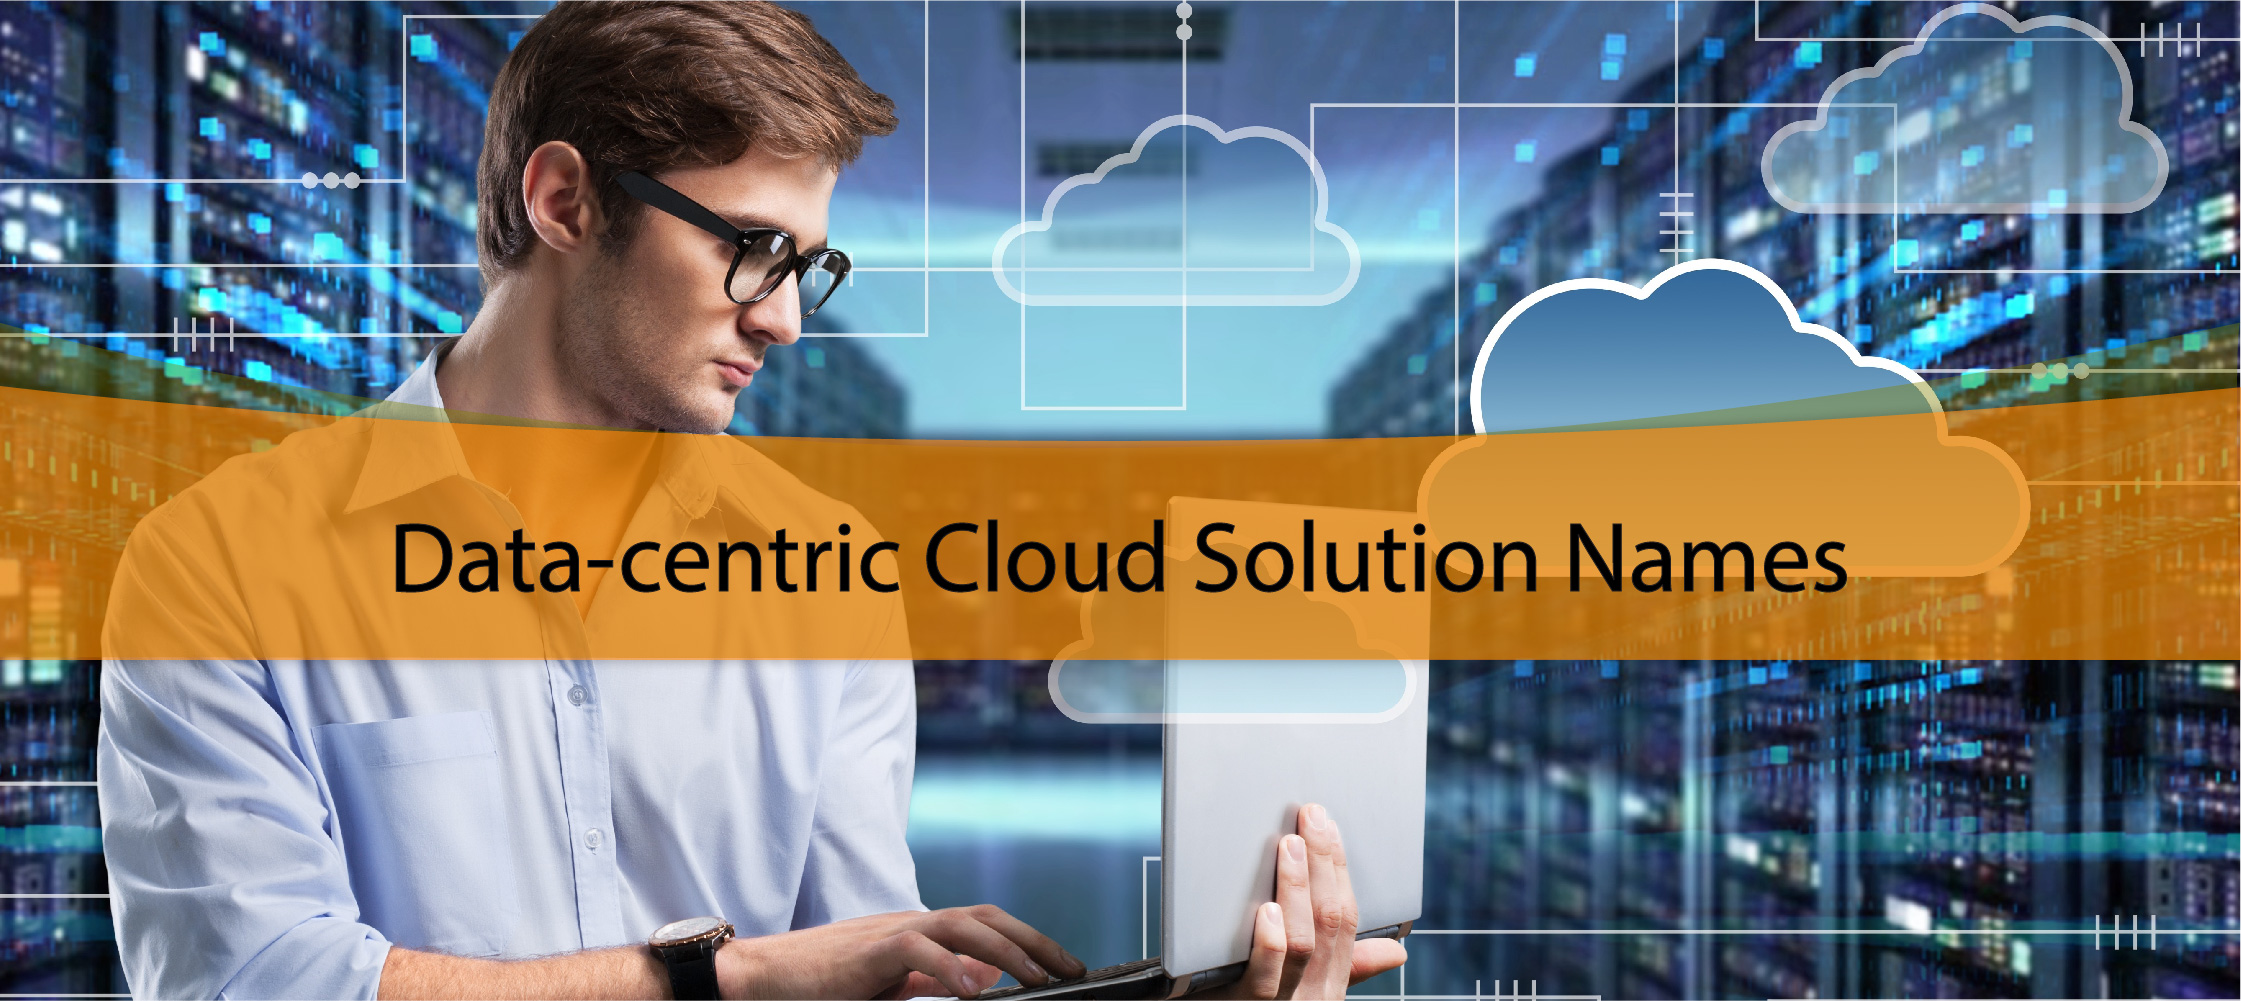 Data-centric Cloud Solution Names